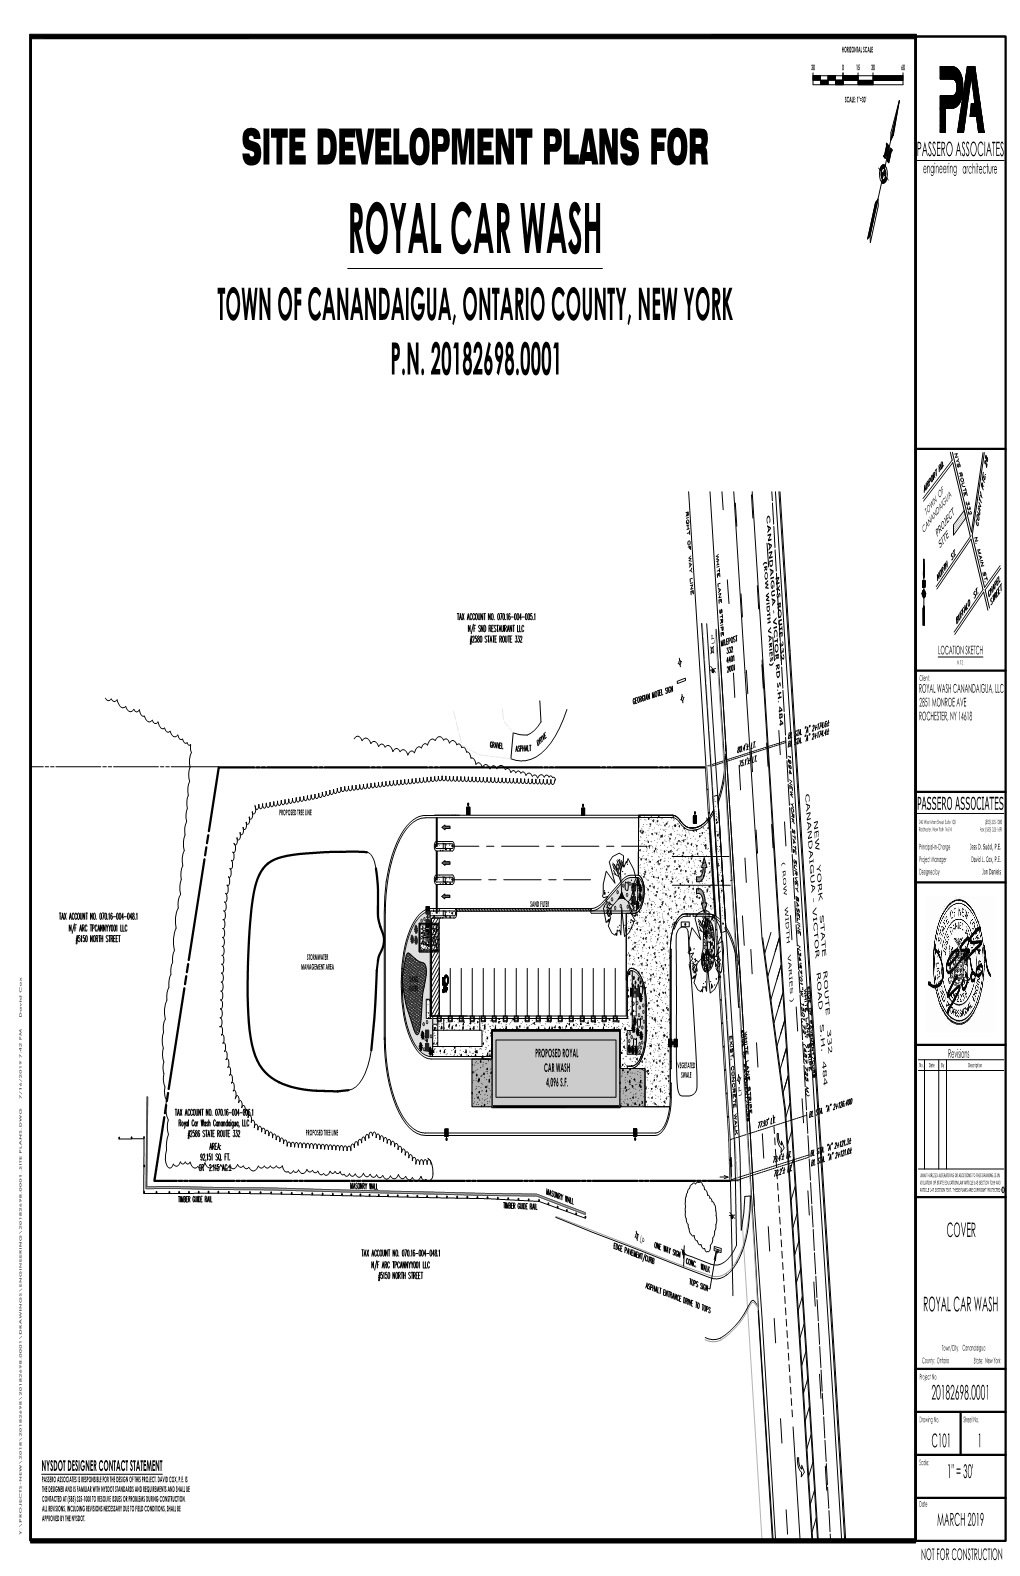 SITE DEVELOPMENT PLANS for Engineering Architecture ROYAL CAR WASH TOWN of CANANDAIGUA, ONTARIO COUNTY, NEW YORK P.N